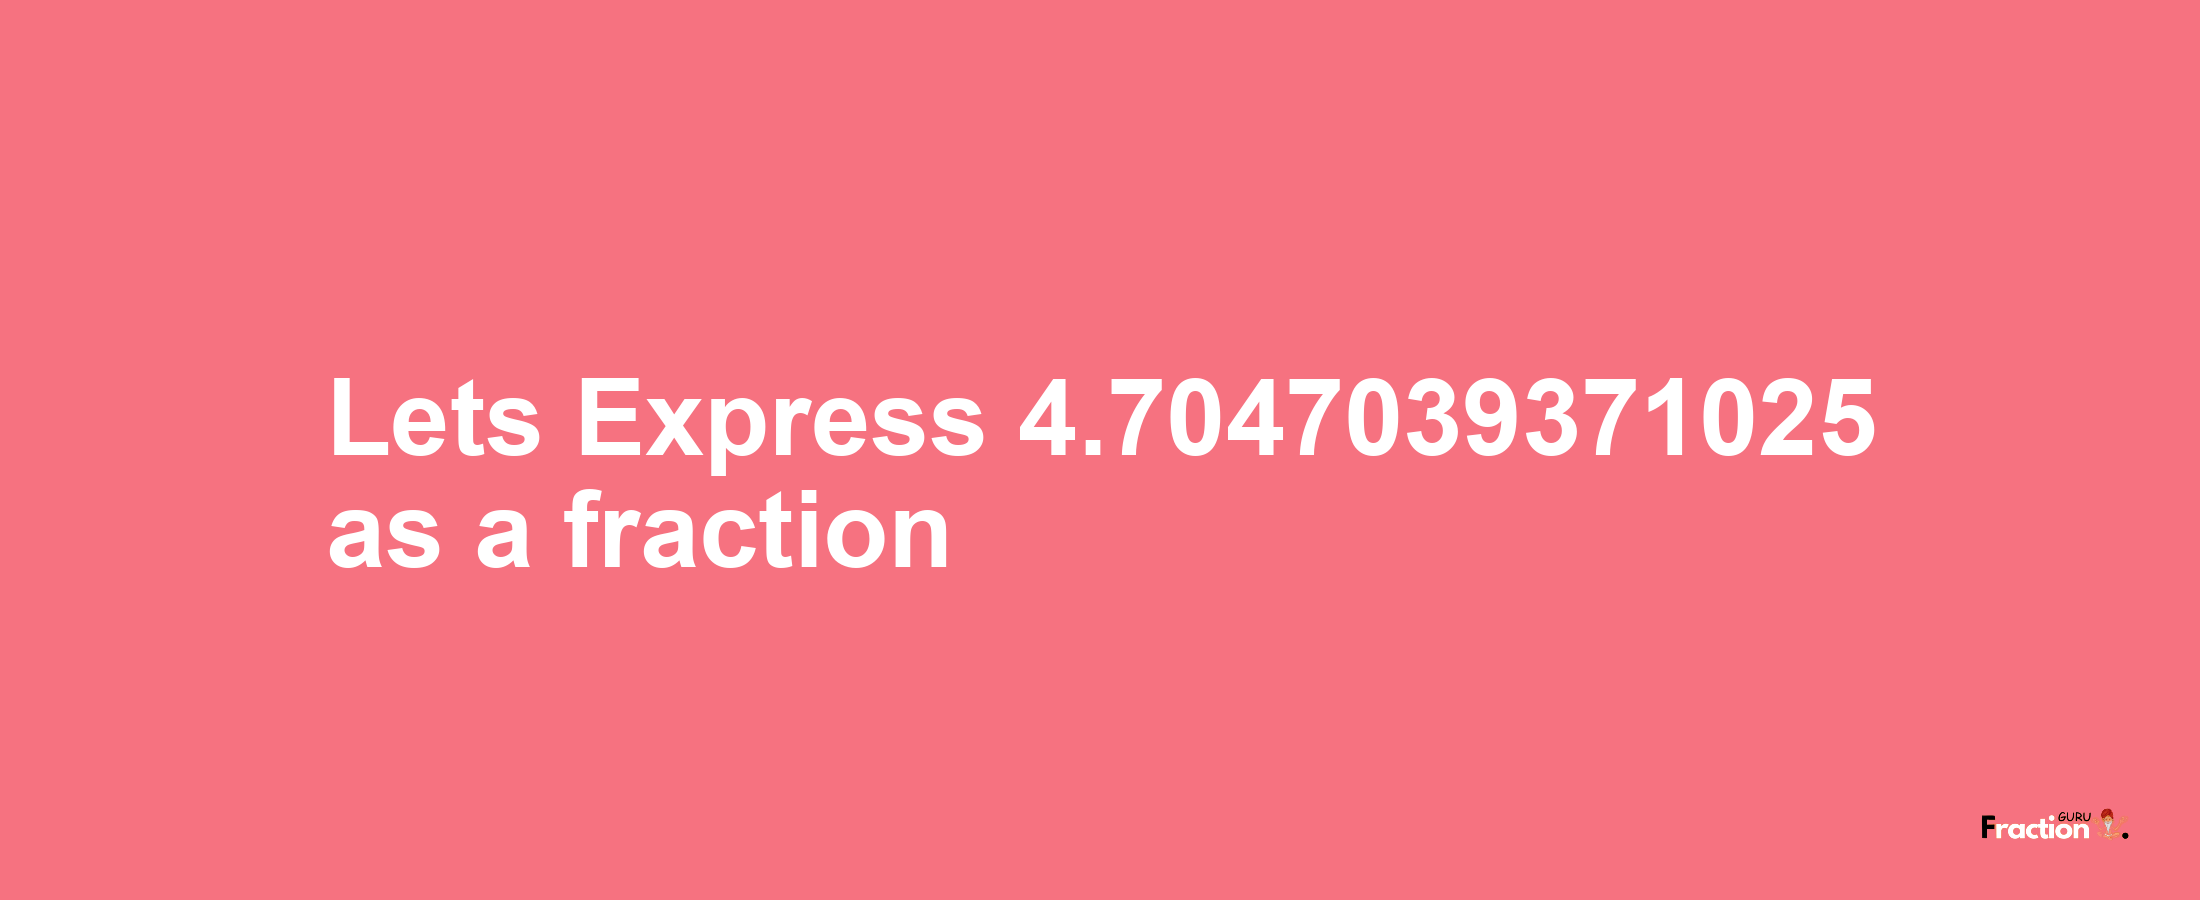 Lets Express 4.7047039371025 as afraction